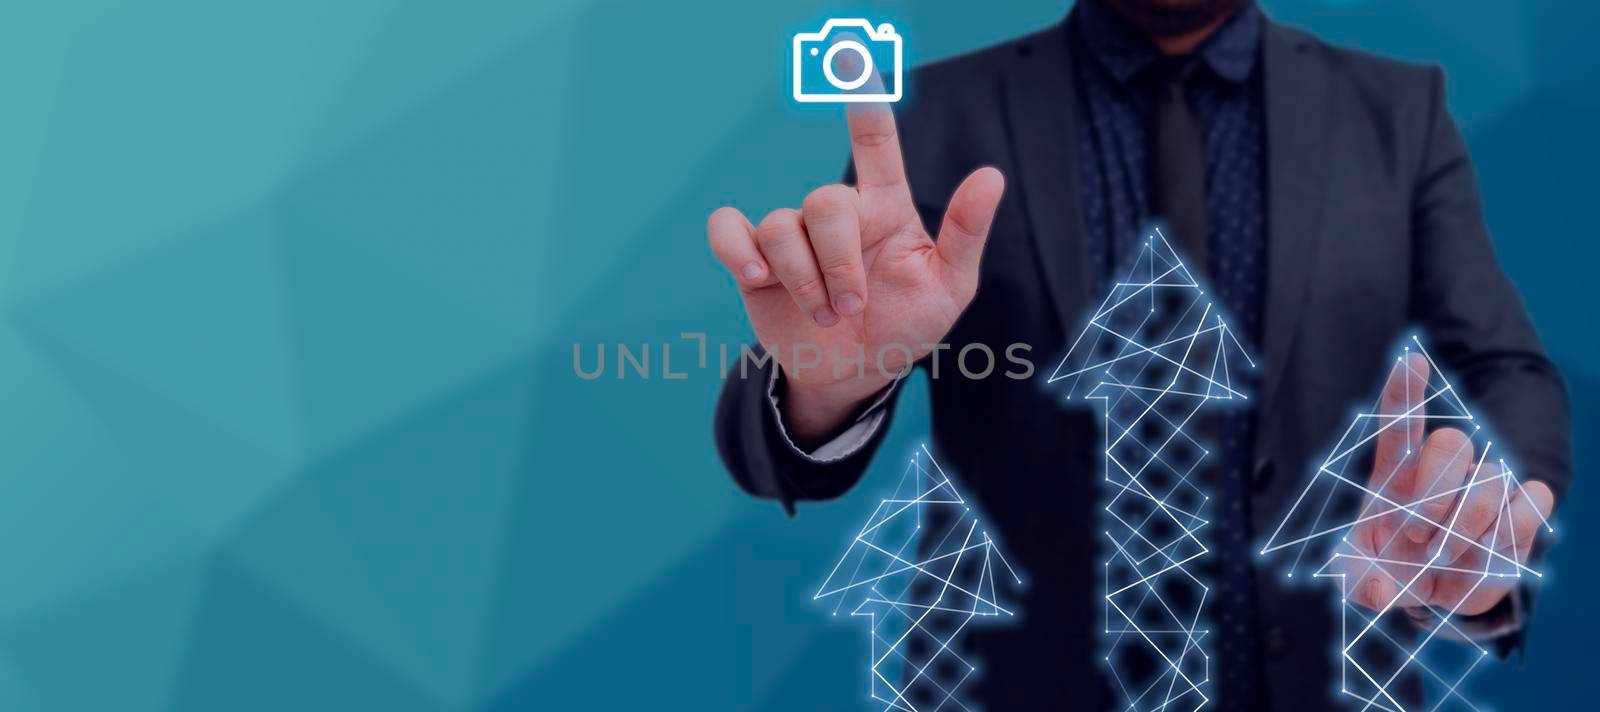 Man In Suit Pointing At Arrows And Camera Showing Crucial Ideas.